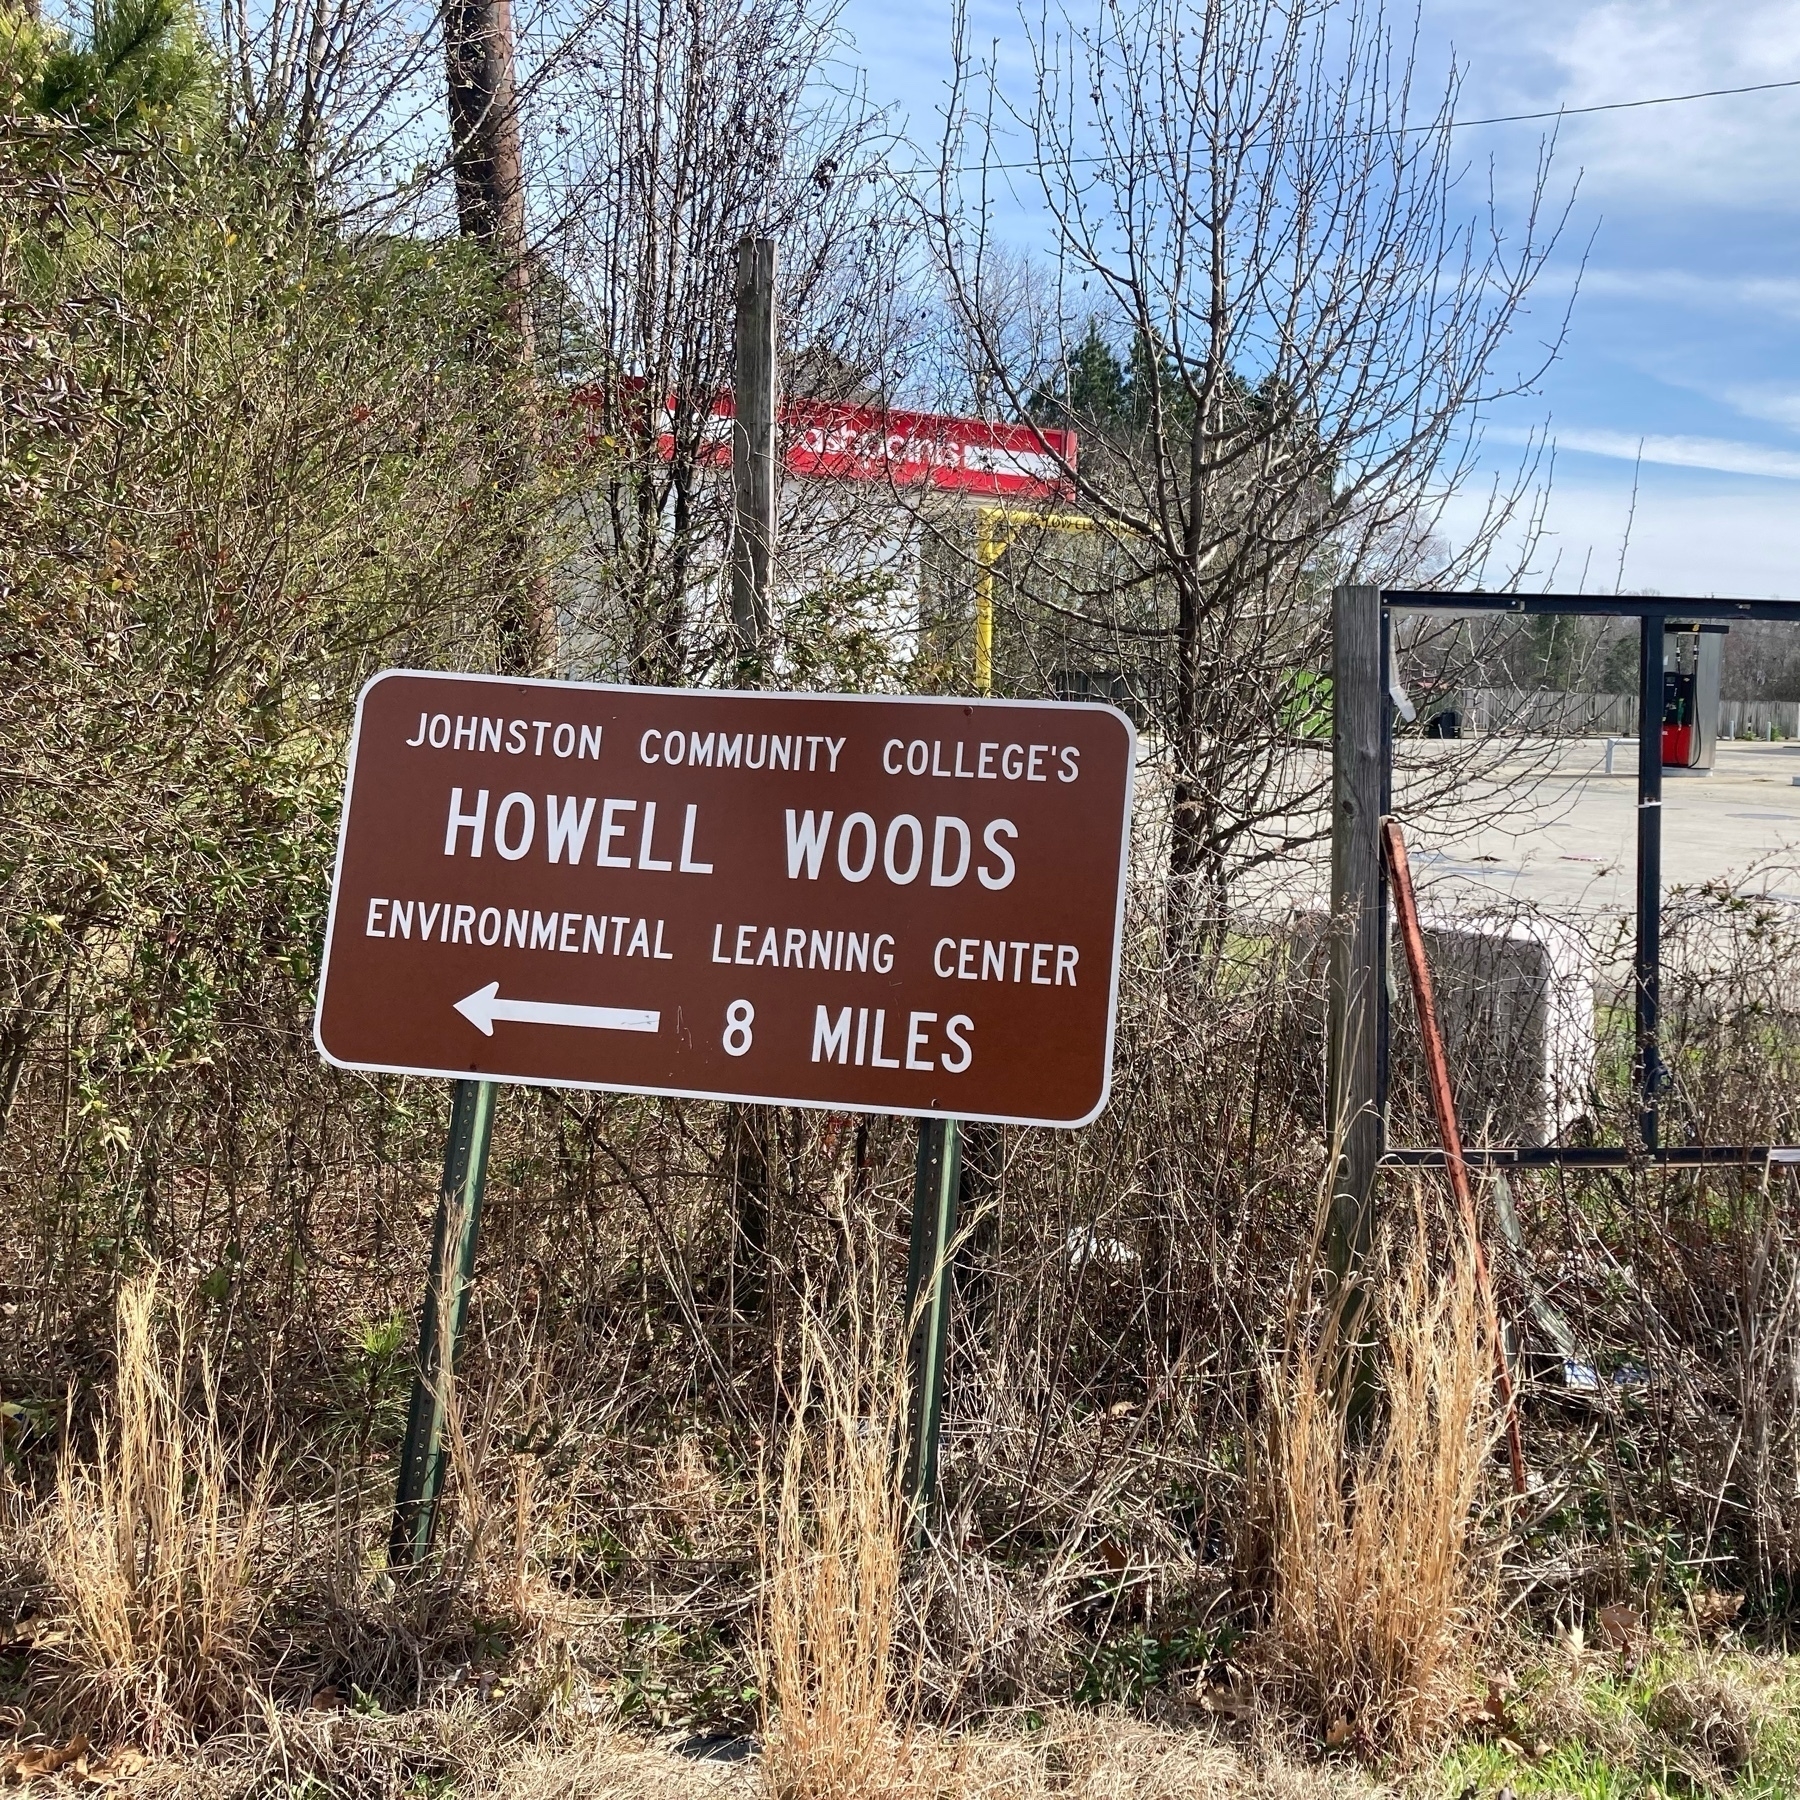 sign with atrow saying Howell Woods Environmental Learning Center 8 miles